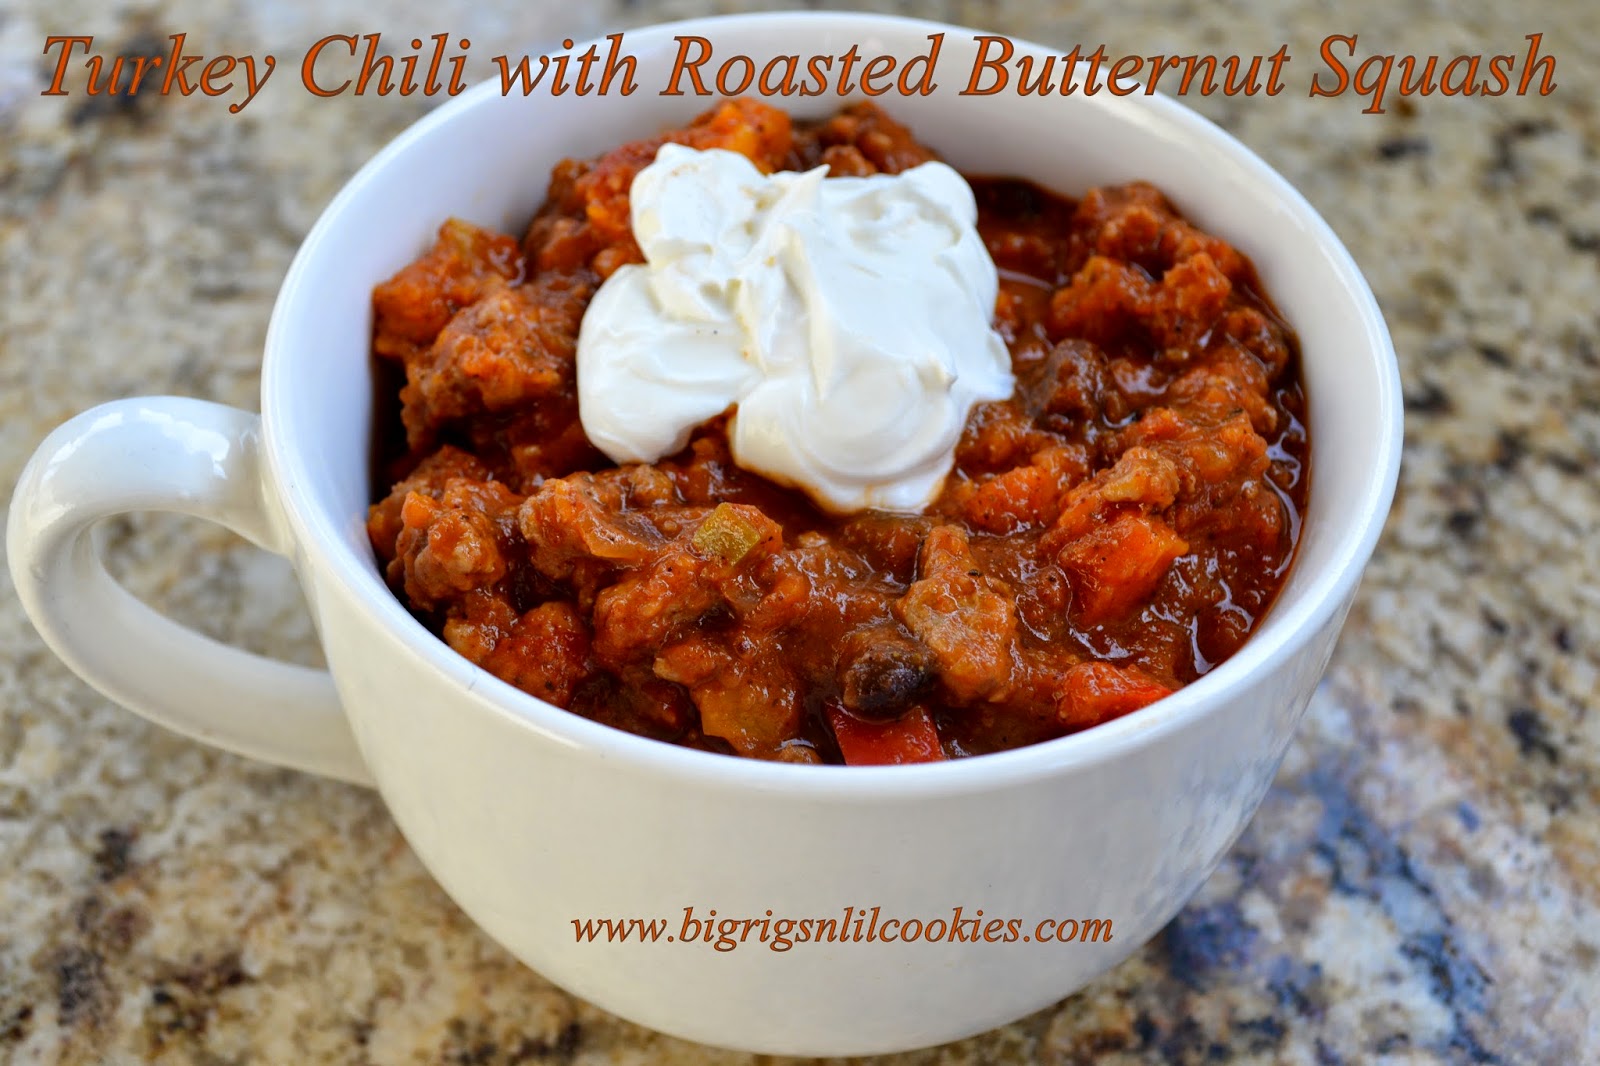 Big Rigs 'n Lil' Cookies: Turkey Chili with Roasted Butternut Squash